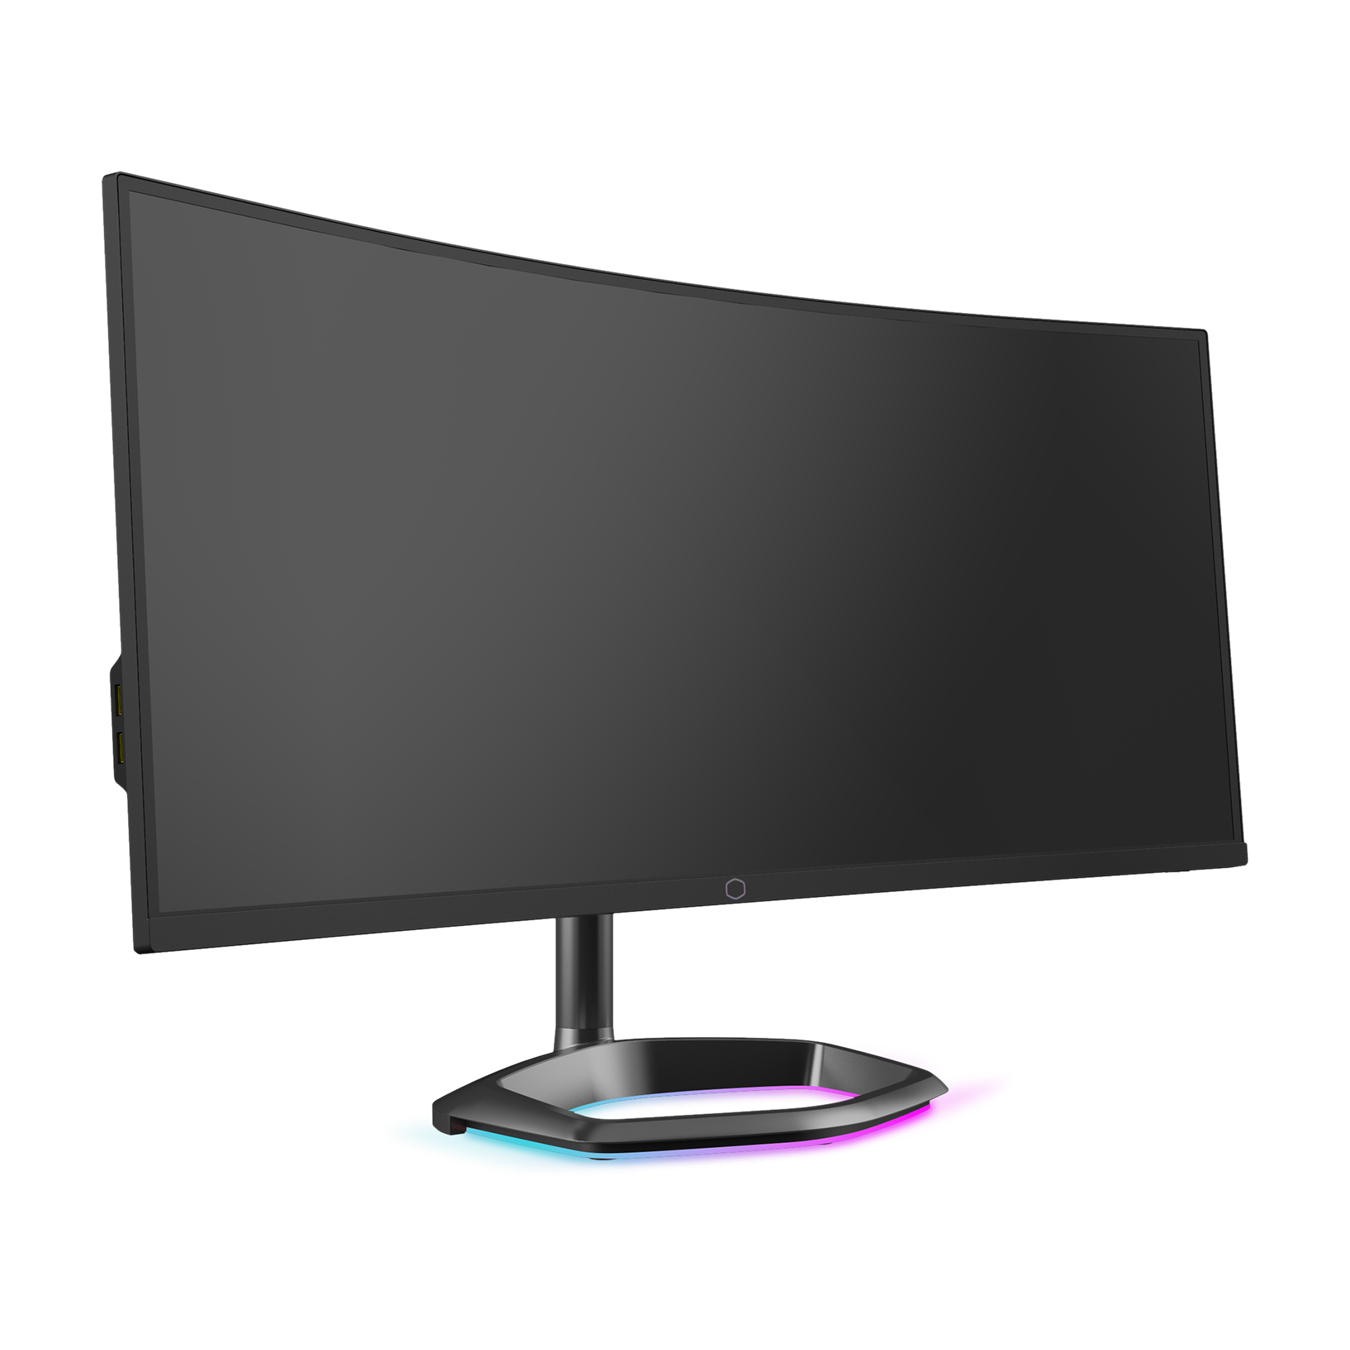 GM34-CWQ ARGB 34" Curved Gaming Monitor - The Low Blue Light Display Mode reduces the amount of potentially harmful blue light and makes you feel at ease during long work play sessions.